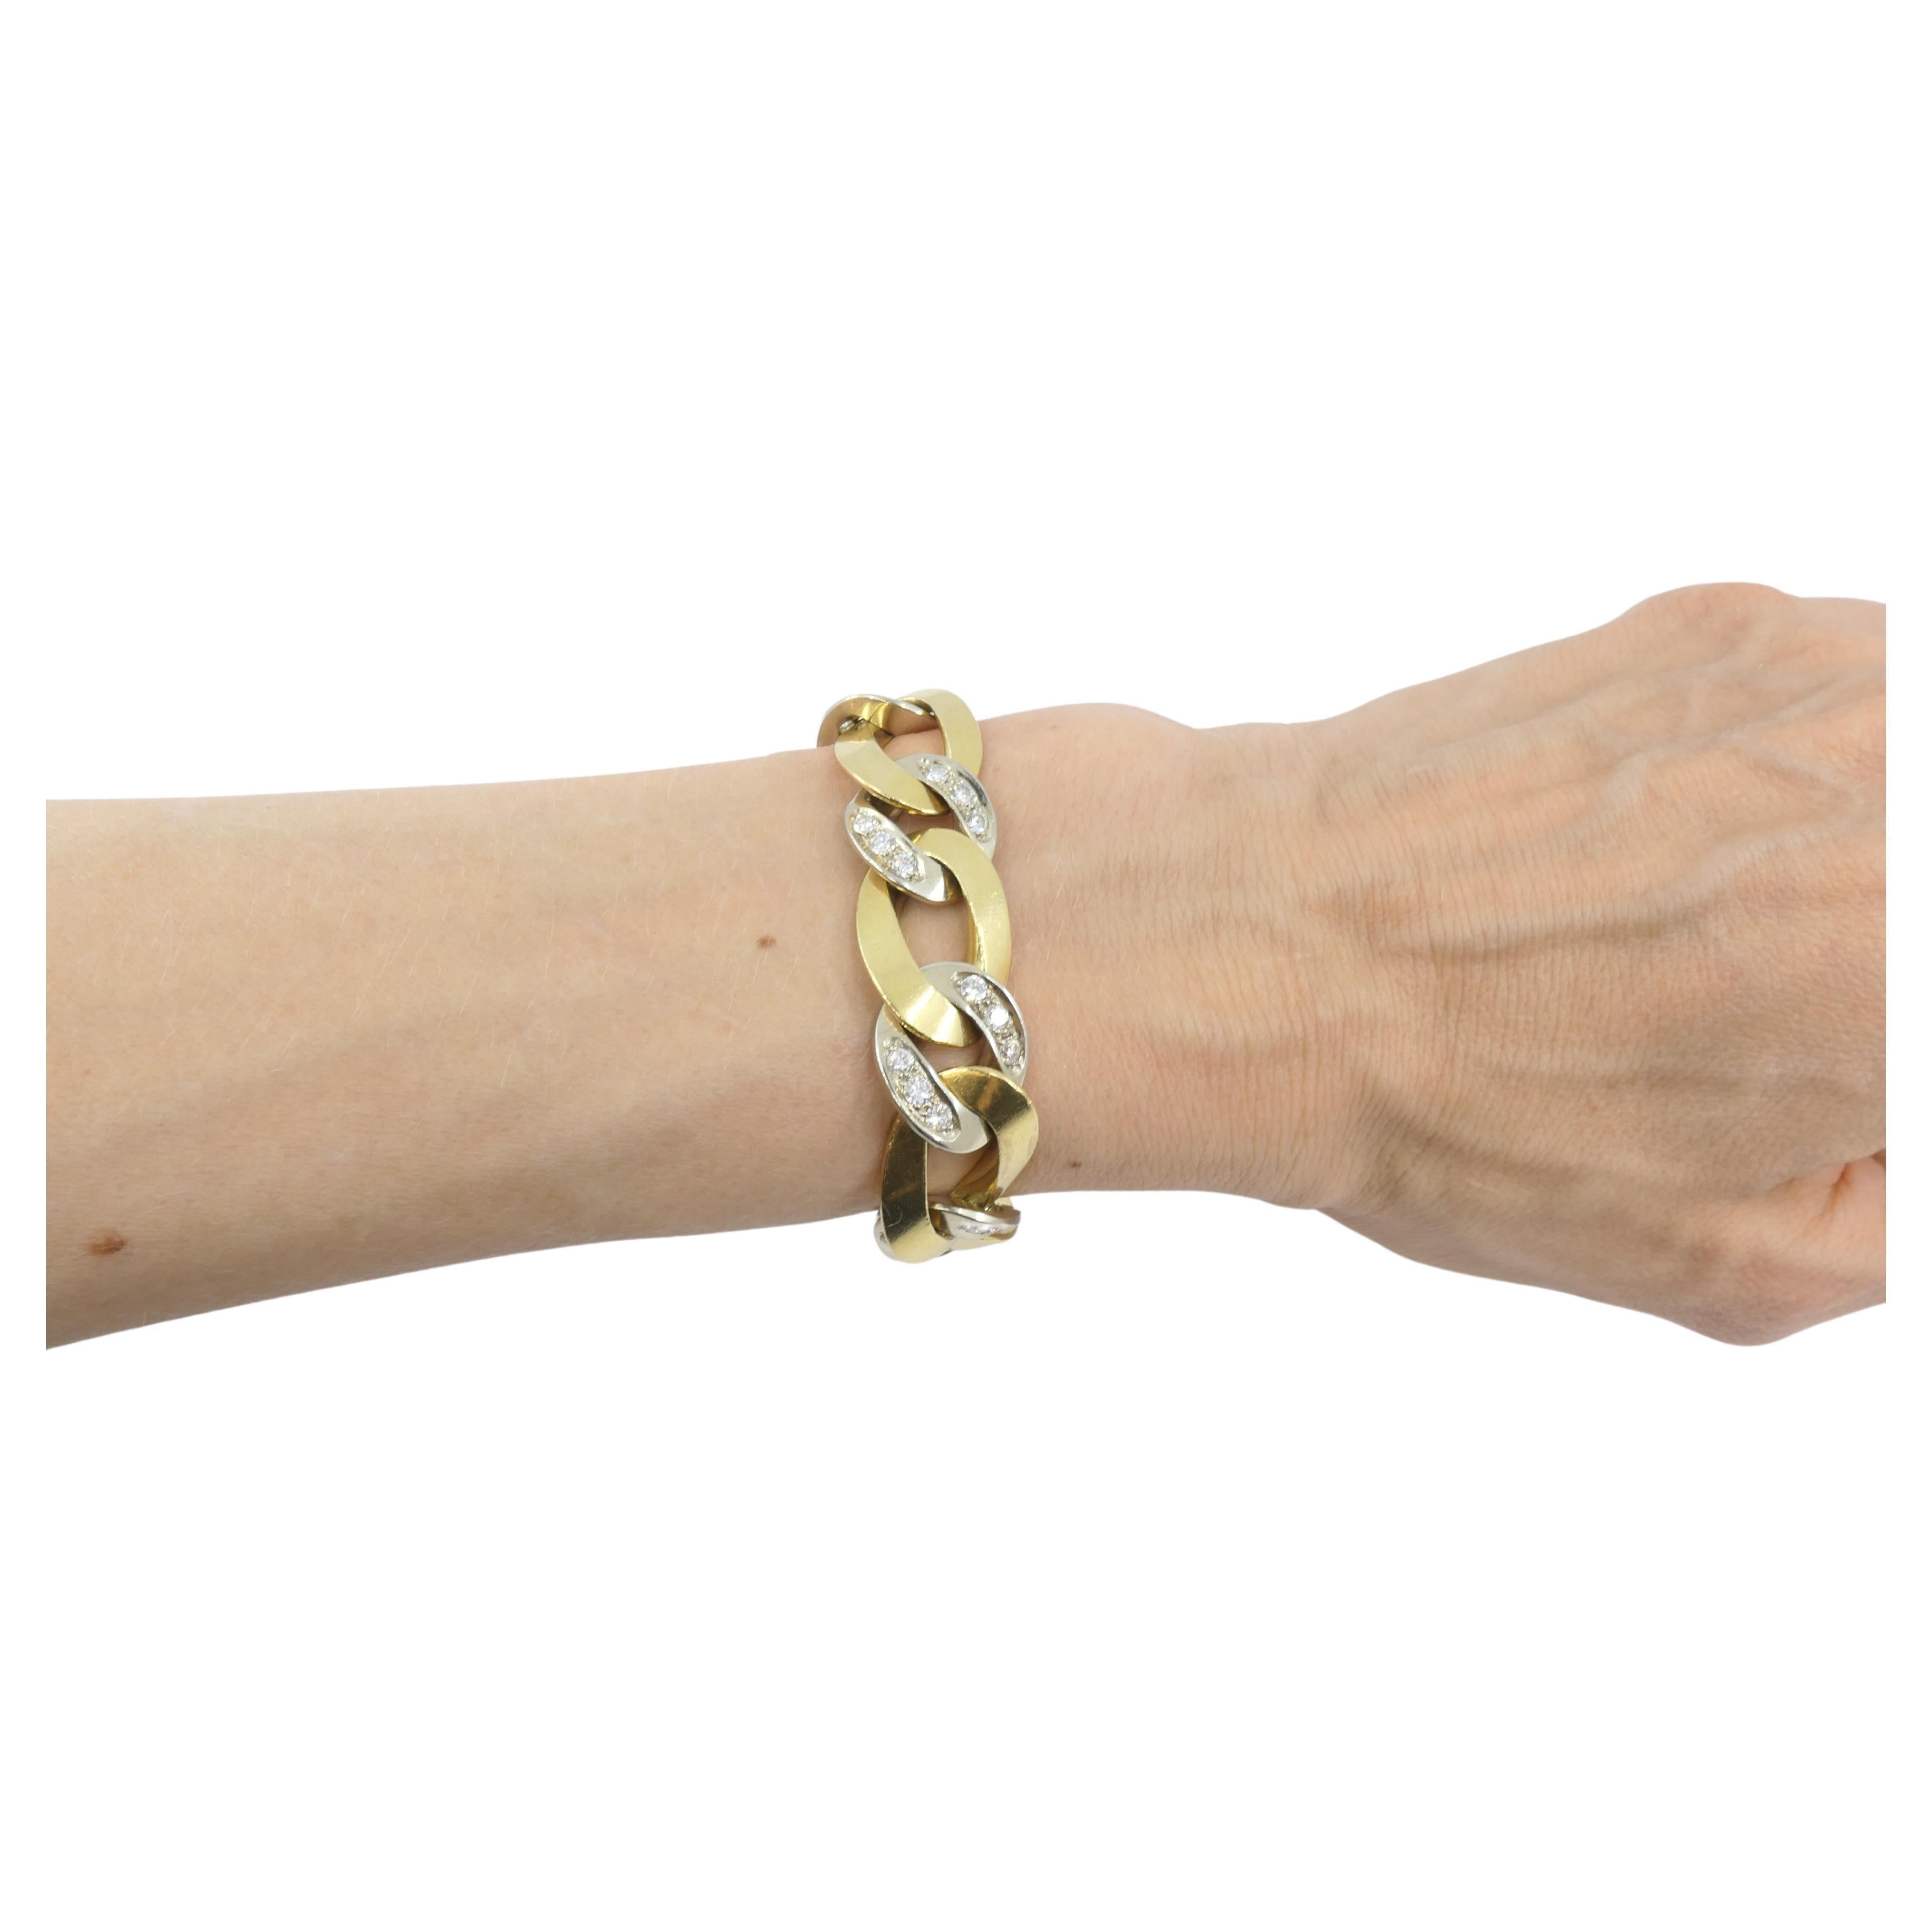 A beautiful link bracelet with a bling by Pomellato. Made of 18k gold, the bracelet comprises elongated yellow gold links alternating with round white gold links. The latter are embellished with diamonds that are set in groups of three in the little